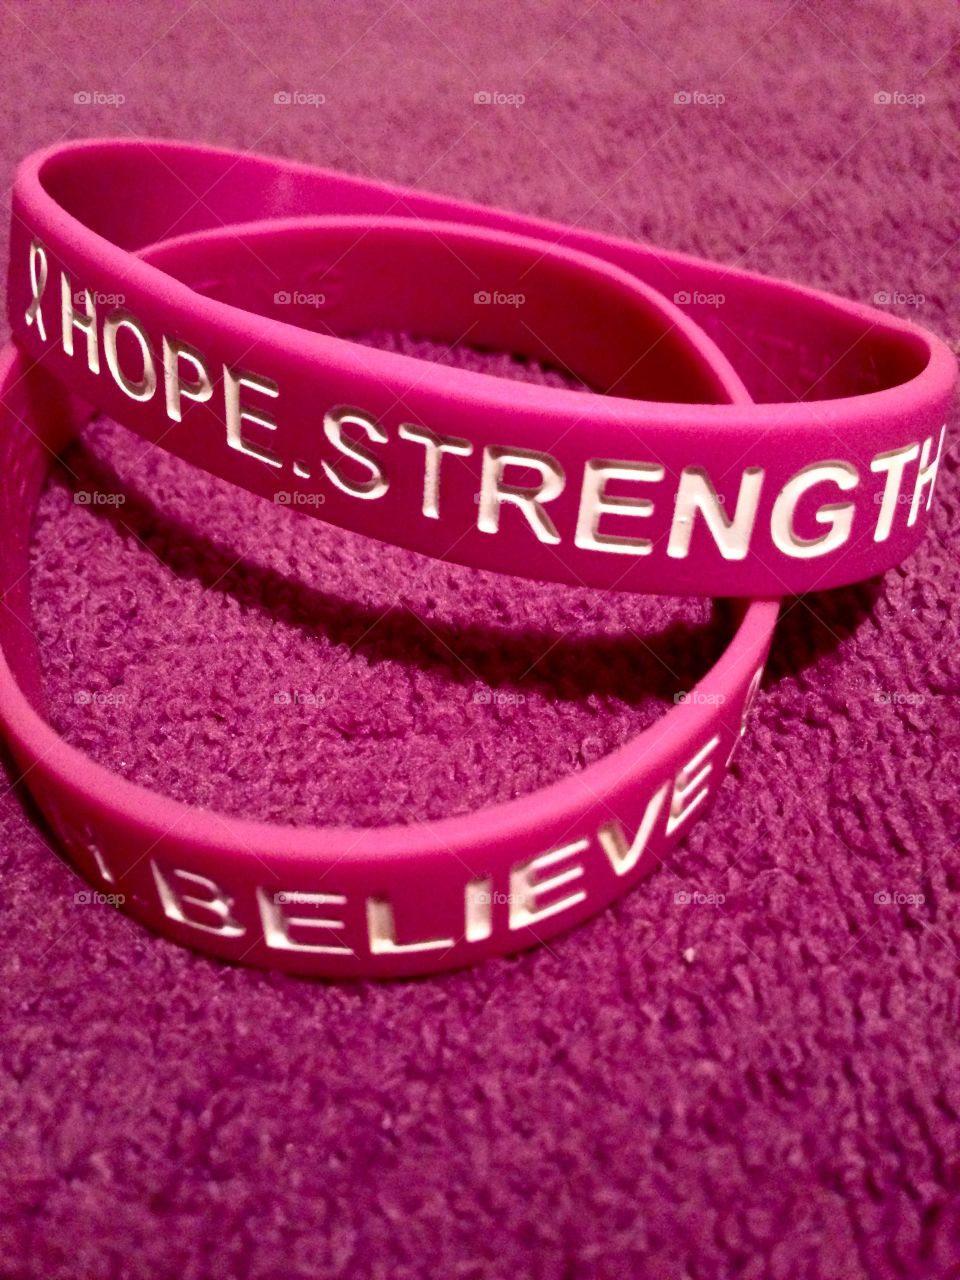 Believe In Hope And Be Strong

Published by:
HappyBrownMonkey 